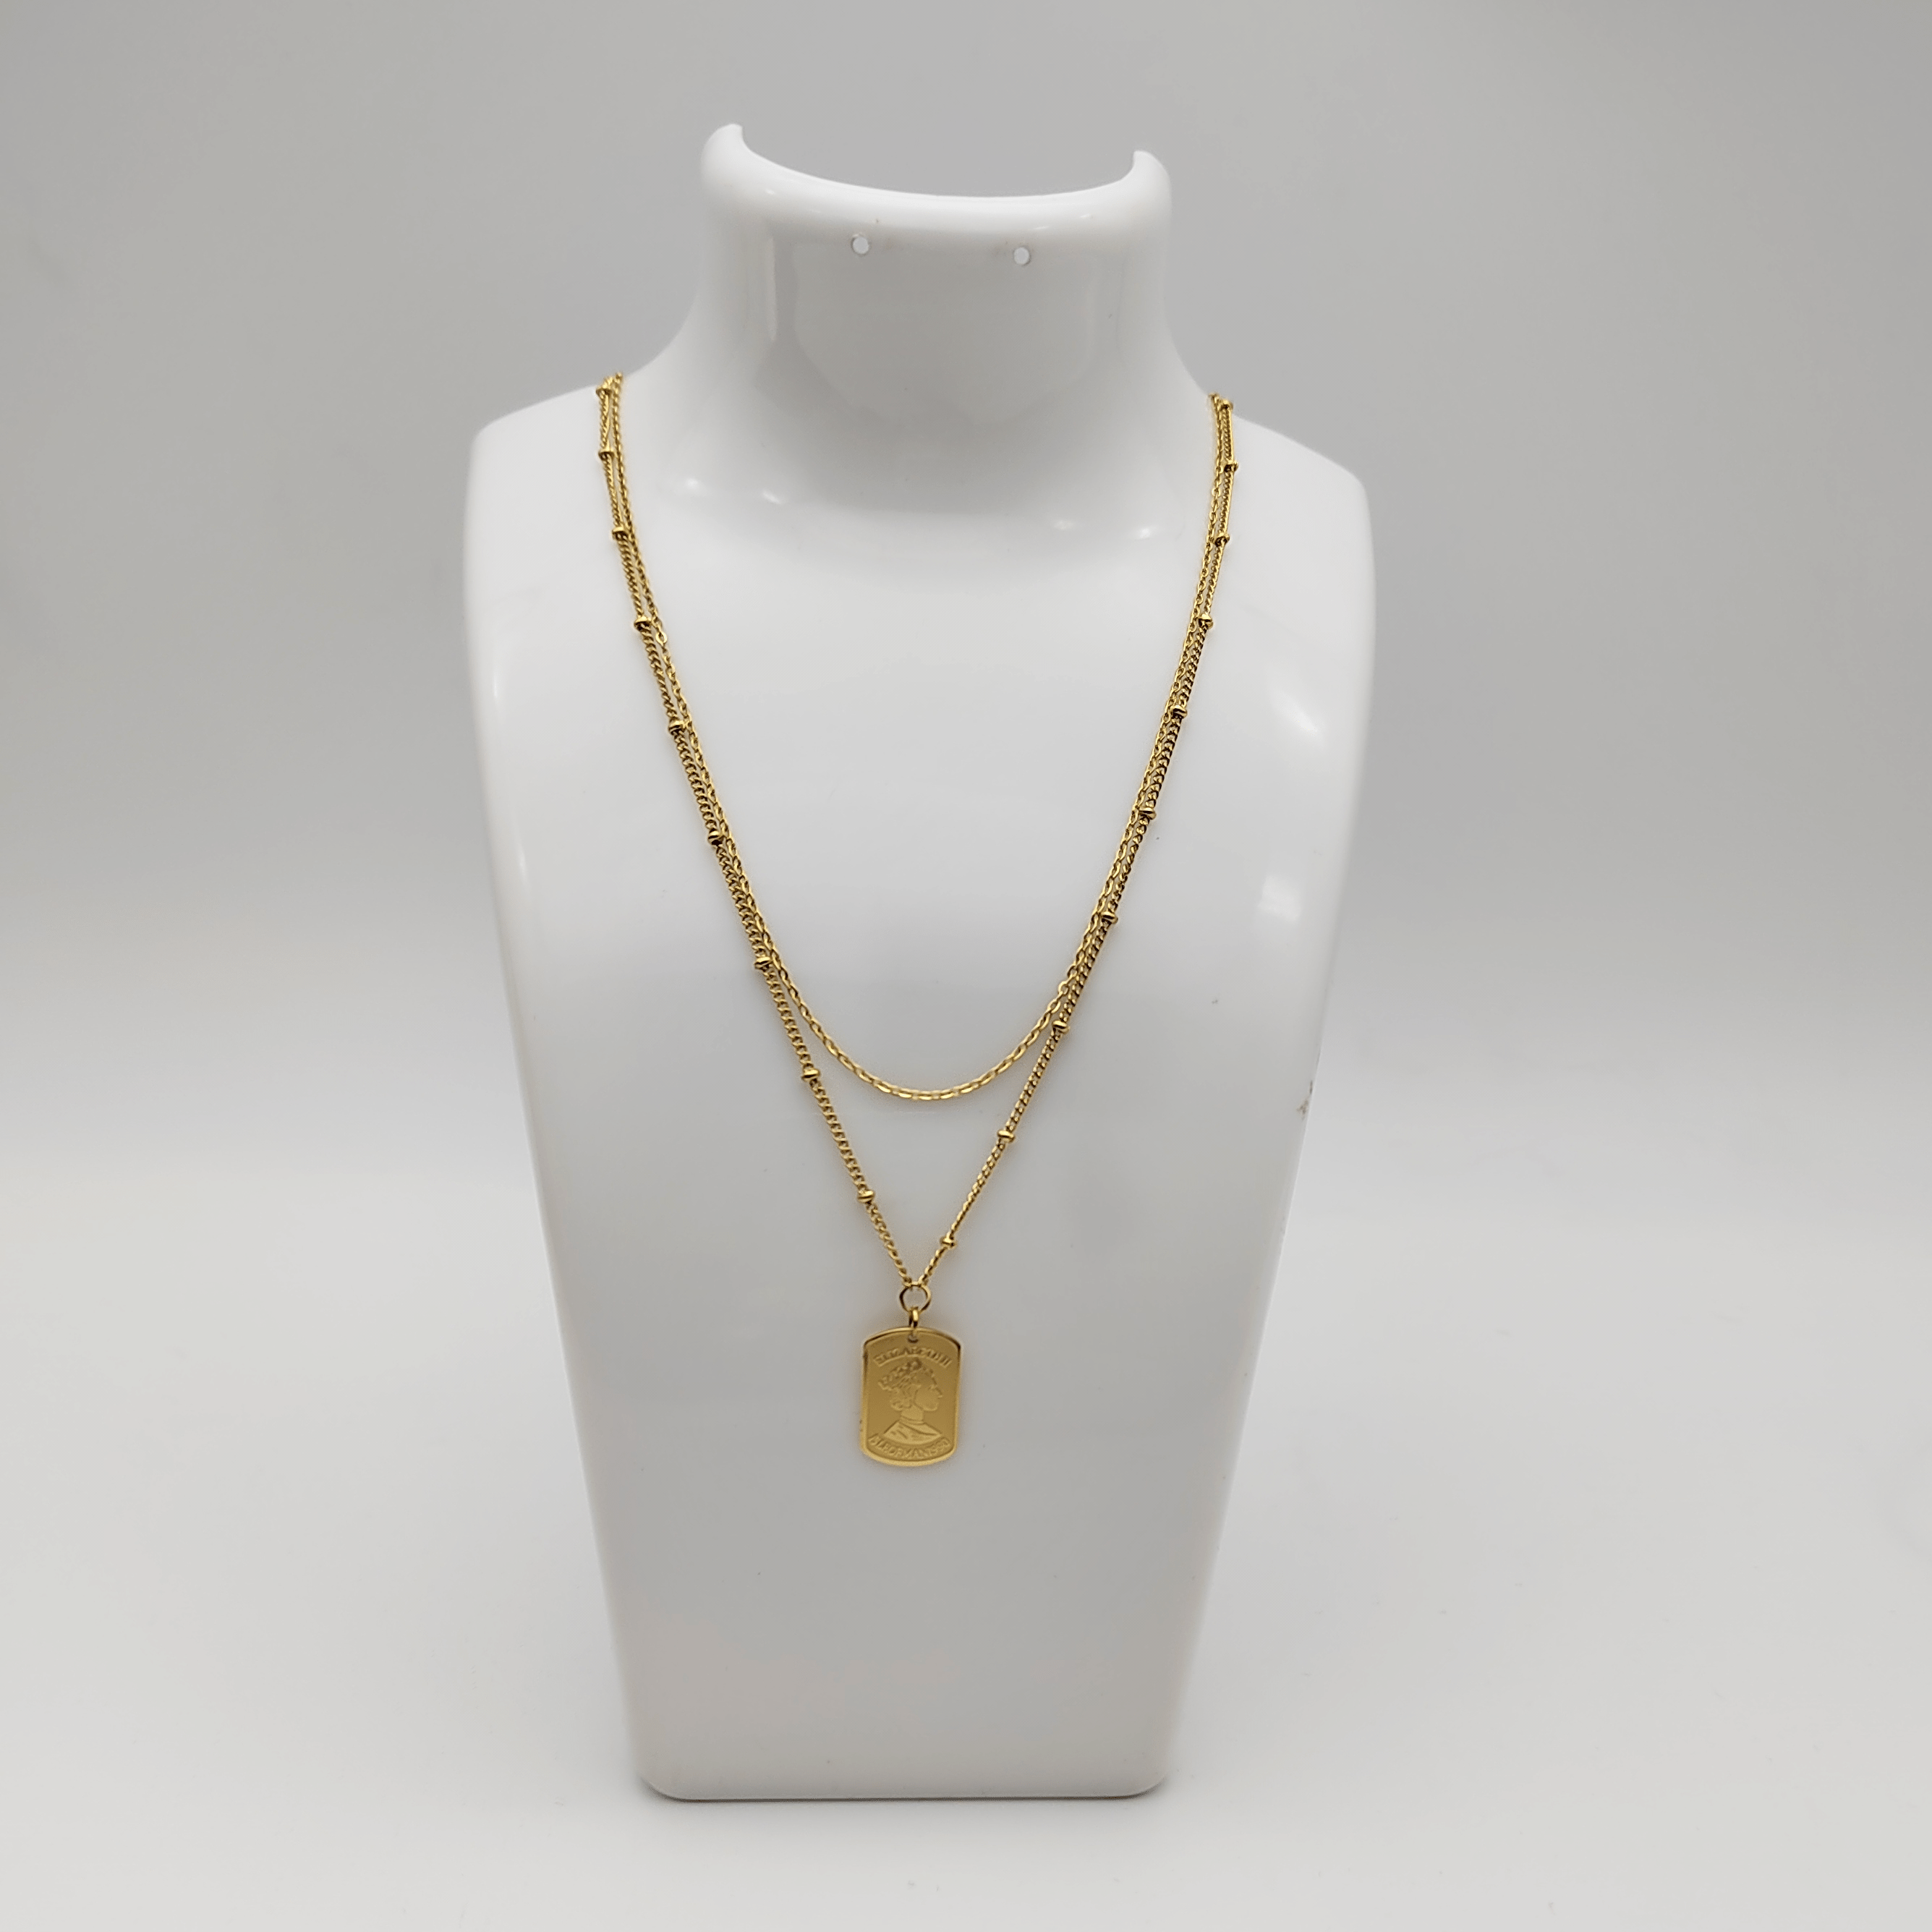 Outlet W&B Female Necklaces Queen Golden Double Stainless Steel Necklace